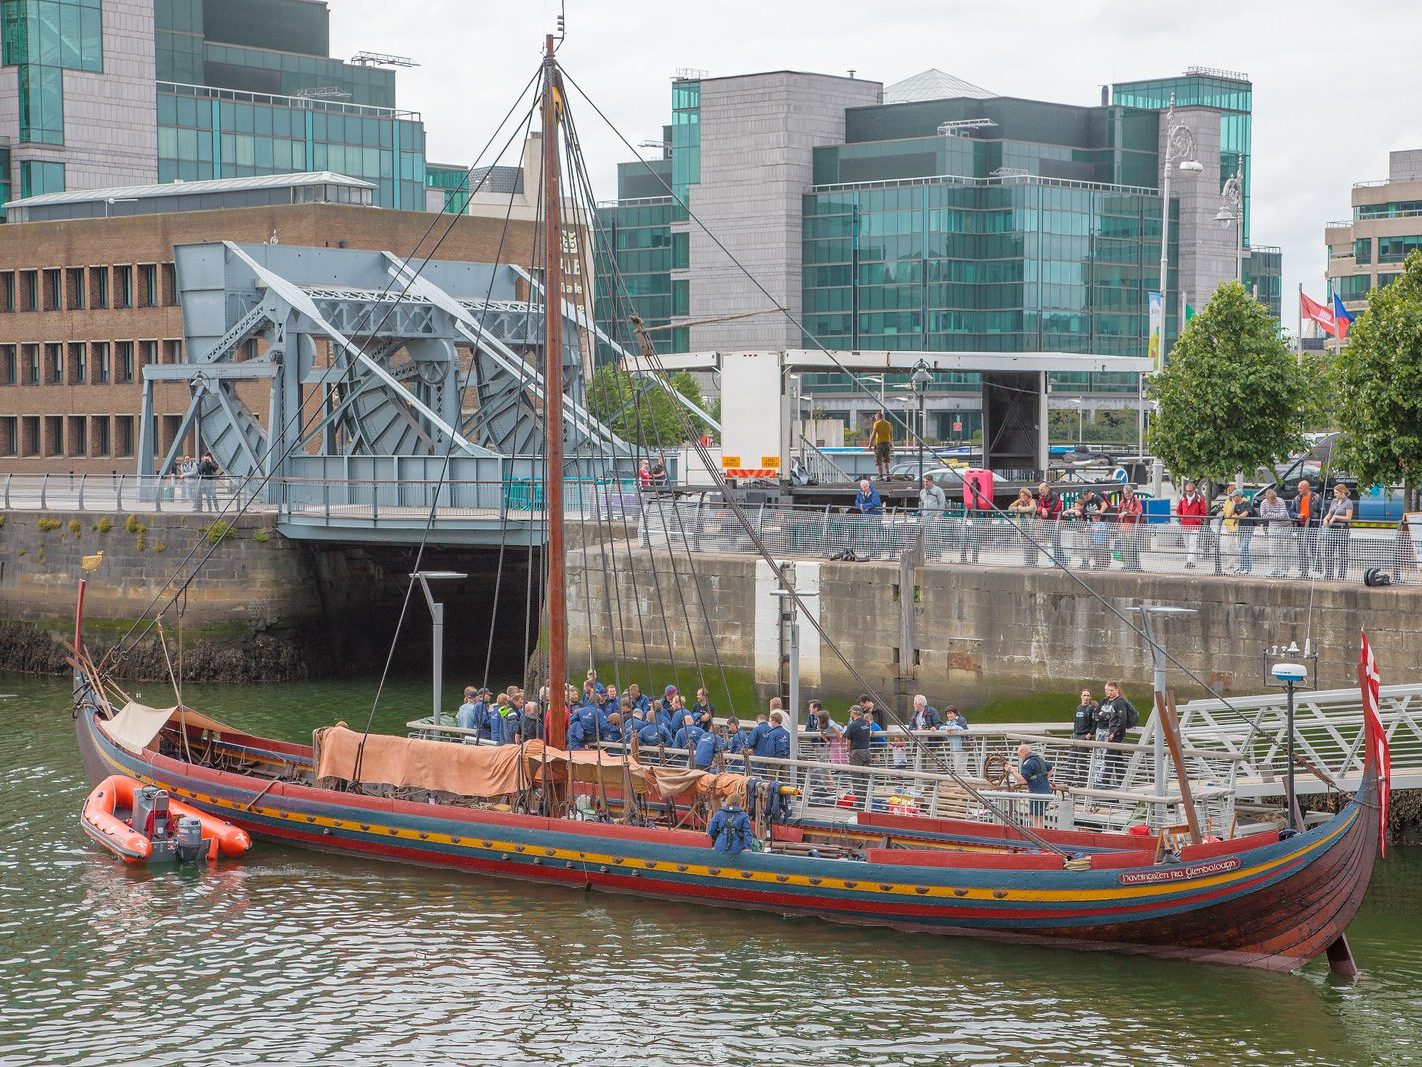 THE SEA STALLION FROM GLEANDALOUGH WAS LIFTED INTO THE LIFFEY USING A LARGE CRANE 005